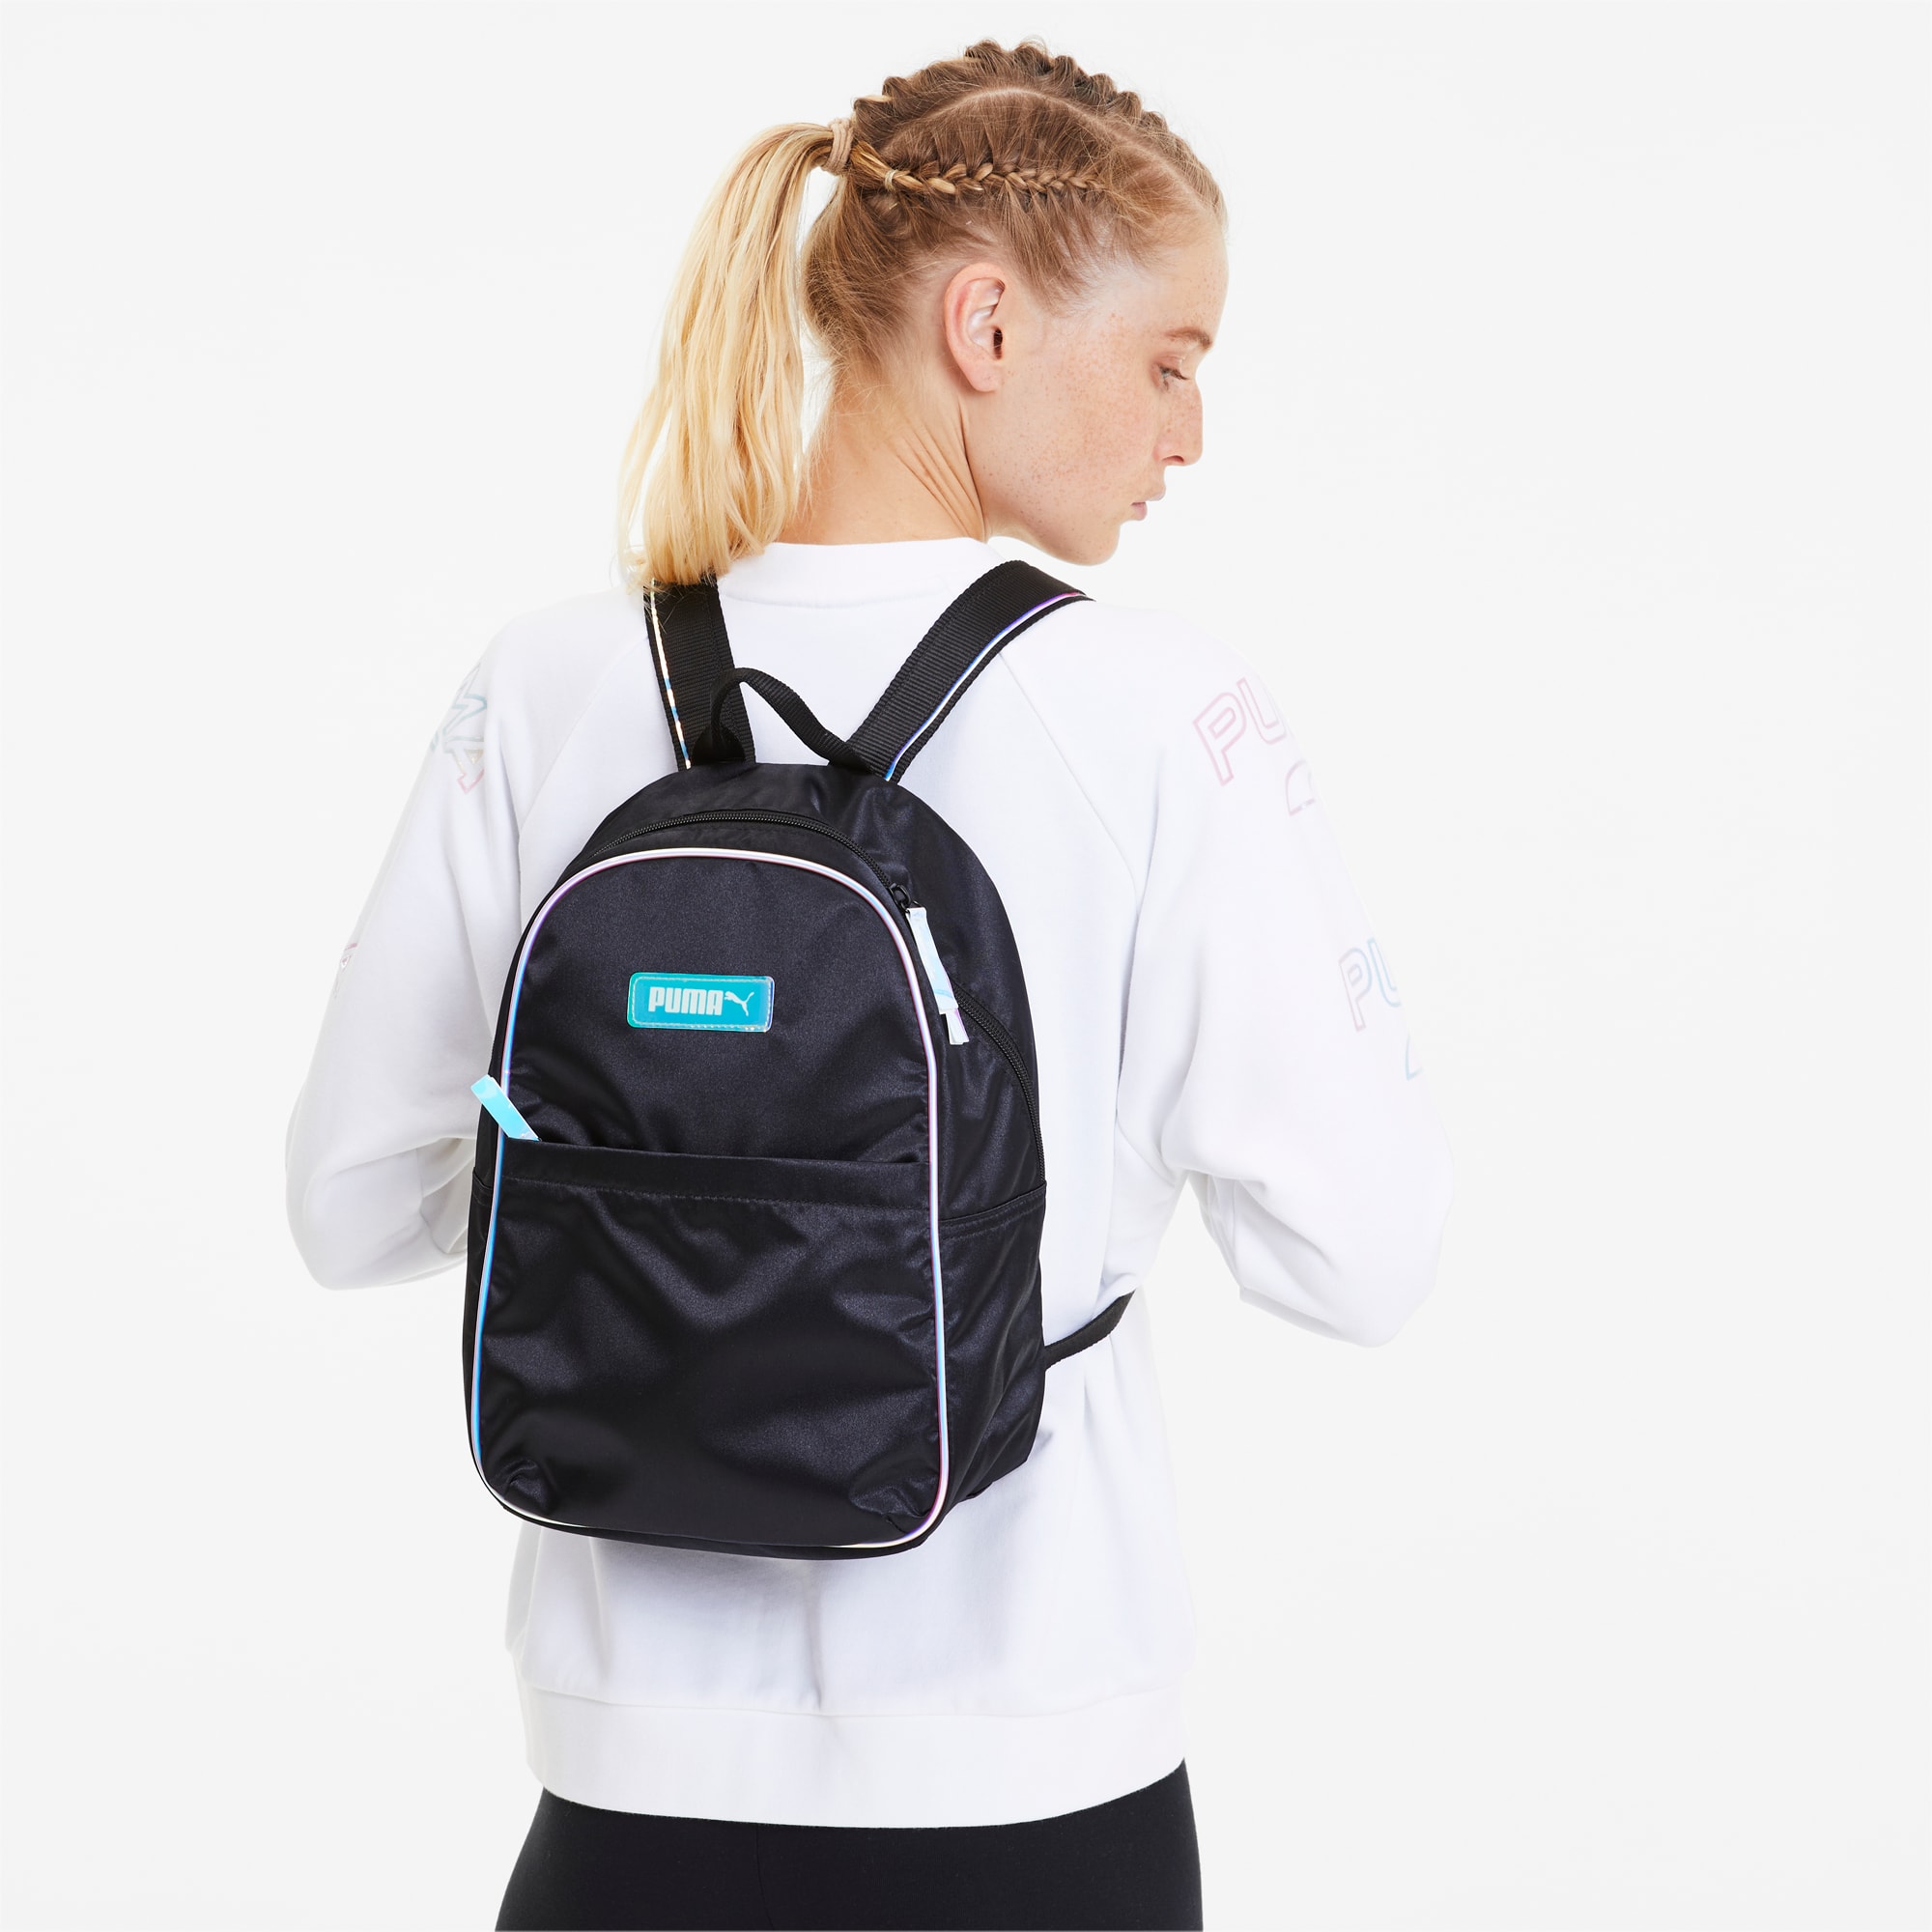 Prime Time Women's Backpack